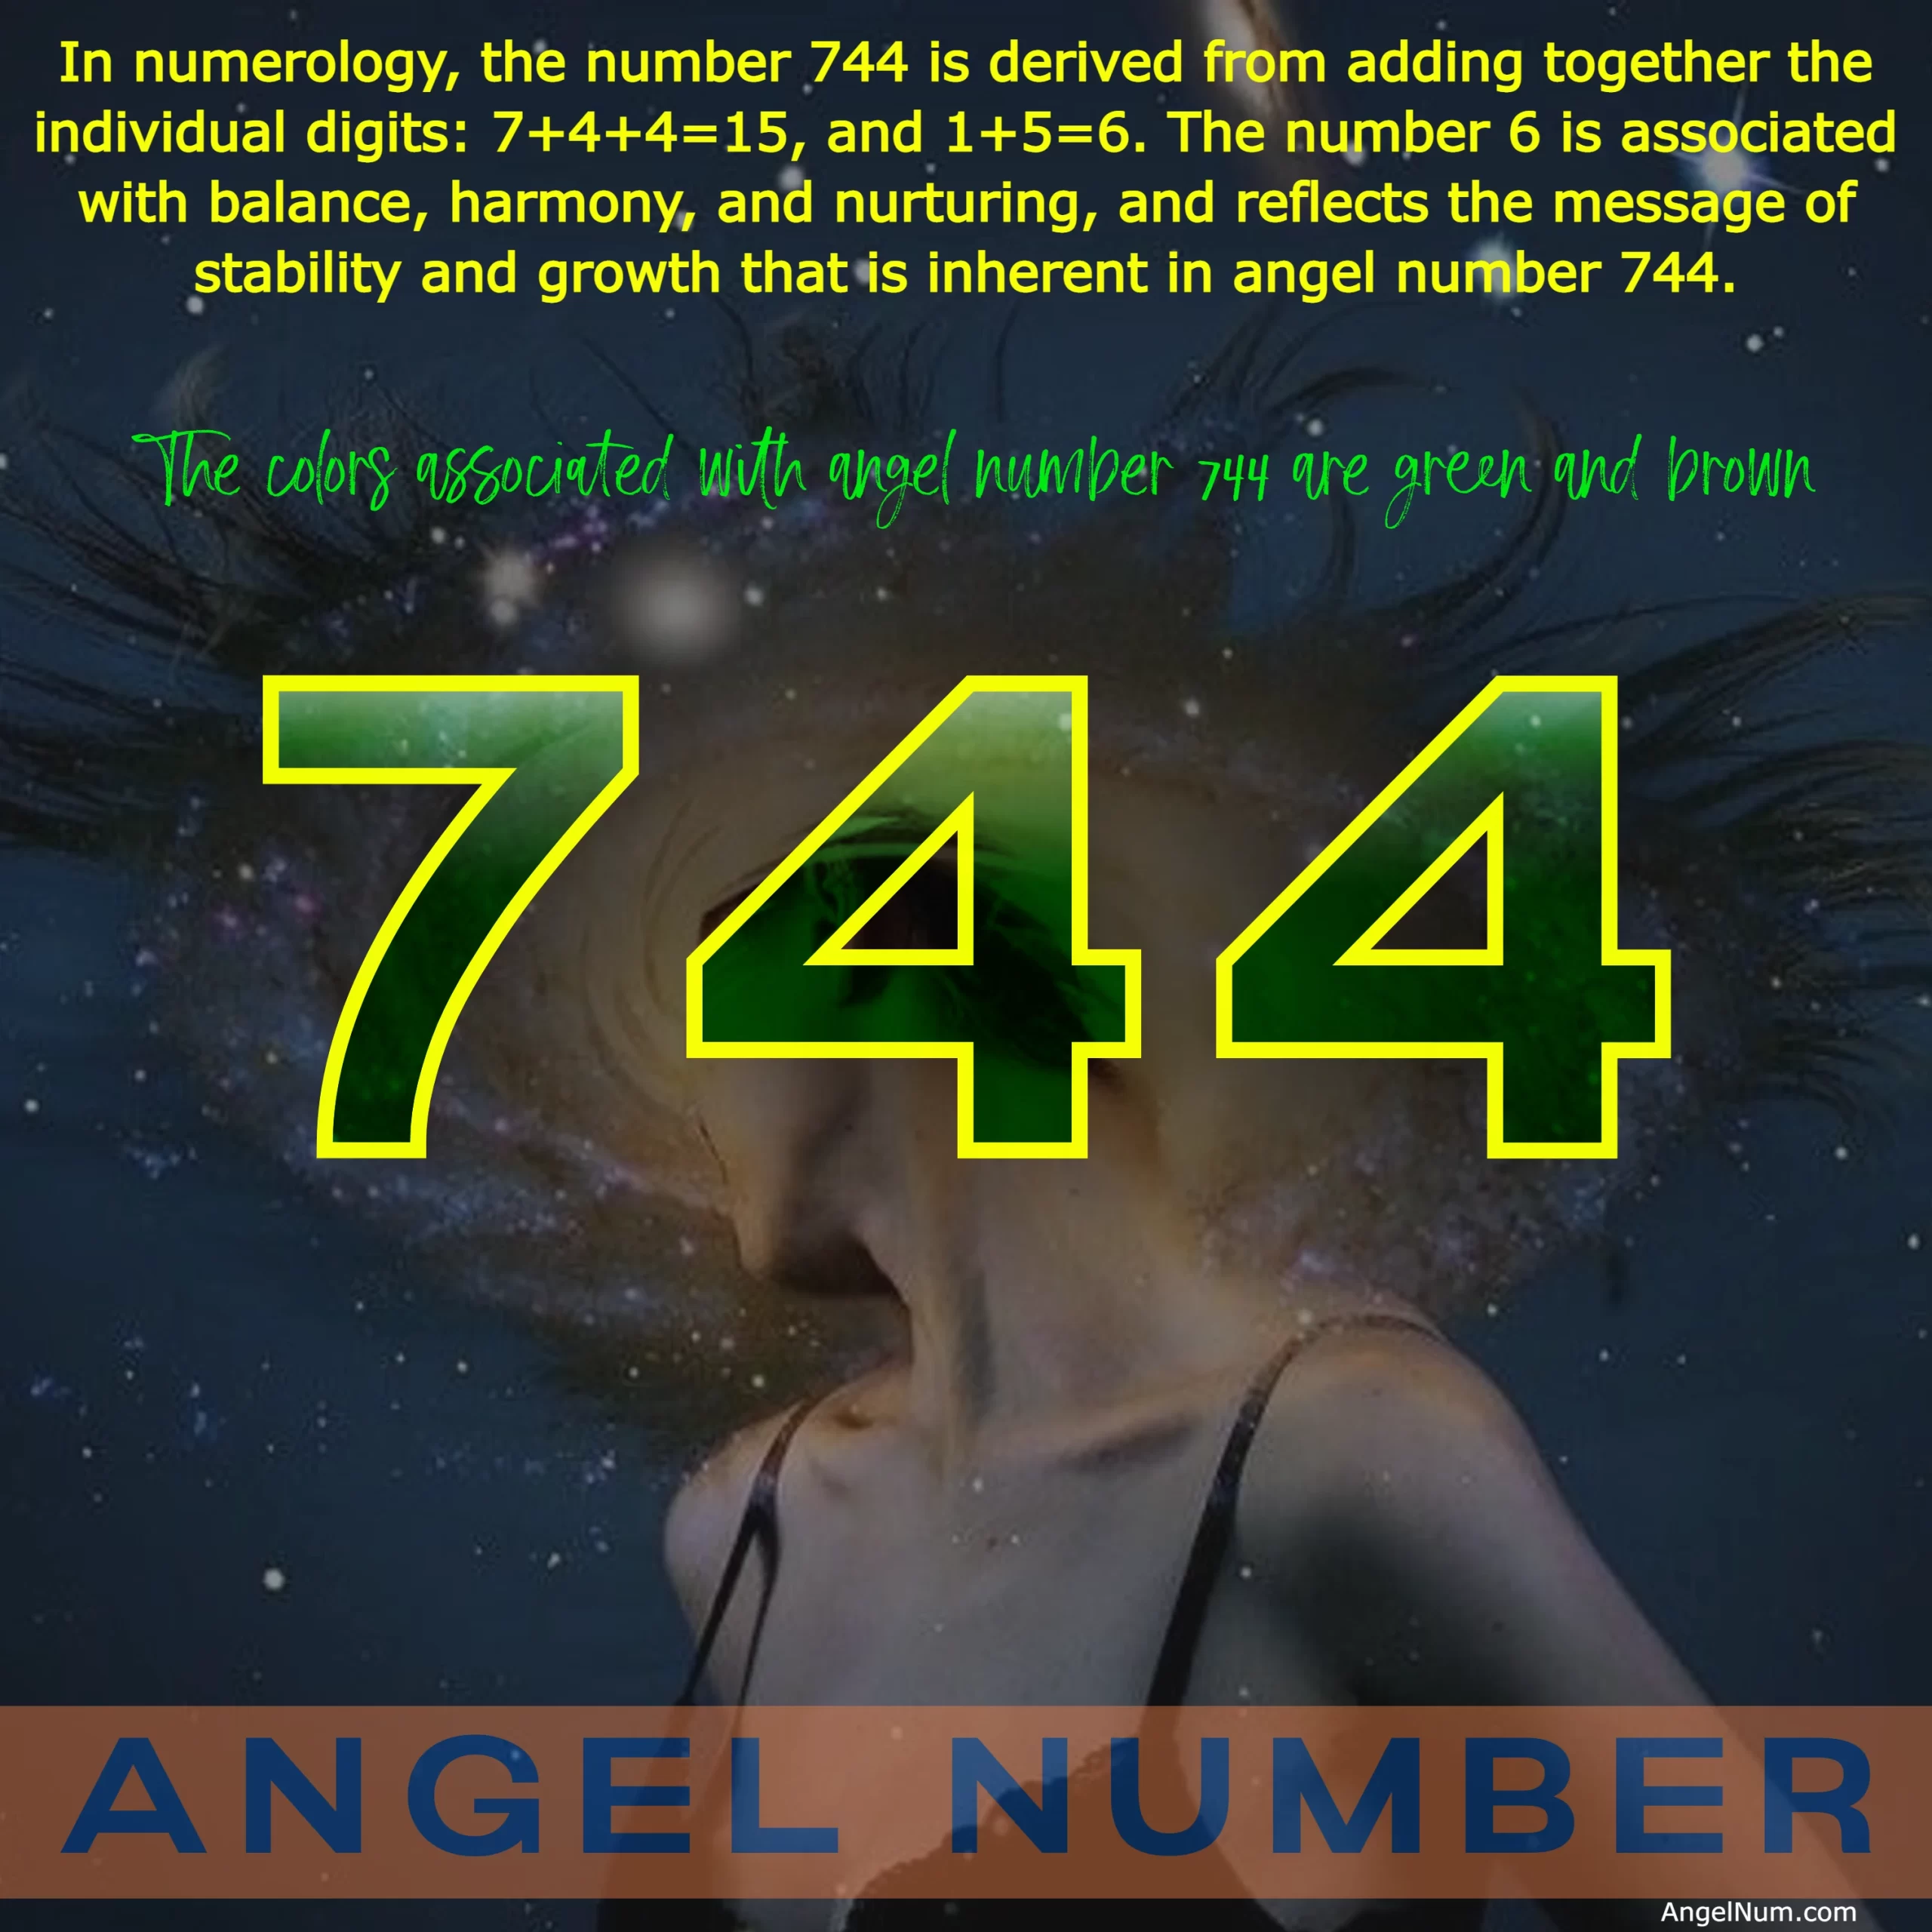 Angel Number 744: Discover the Meaning and Symbolism